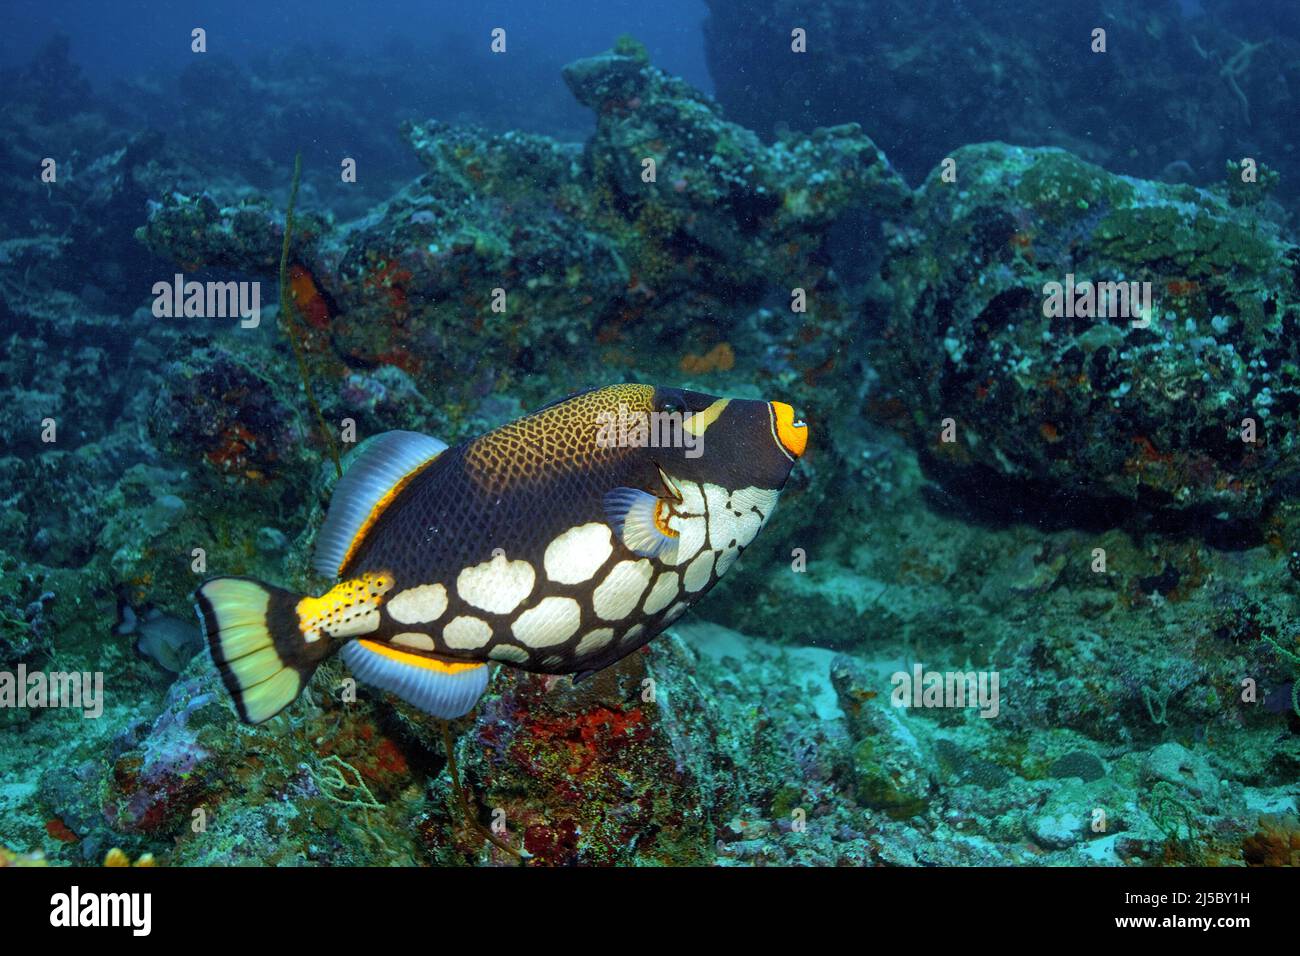 Clown Triggerfish or Big-spotted Triggerfish (Balistoides conspicillum) swimming in a coral reef, Ari Atoll, Maldives, Indian Ocean, Asia Stock Photo